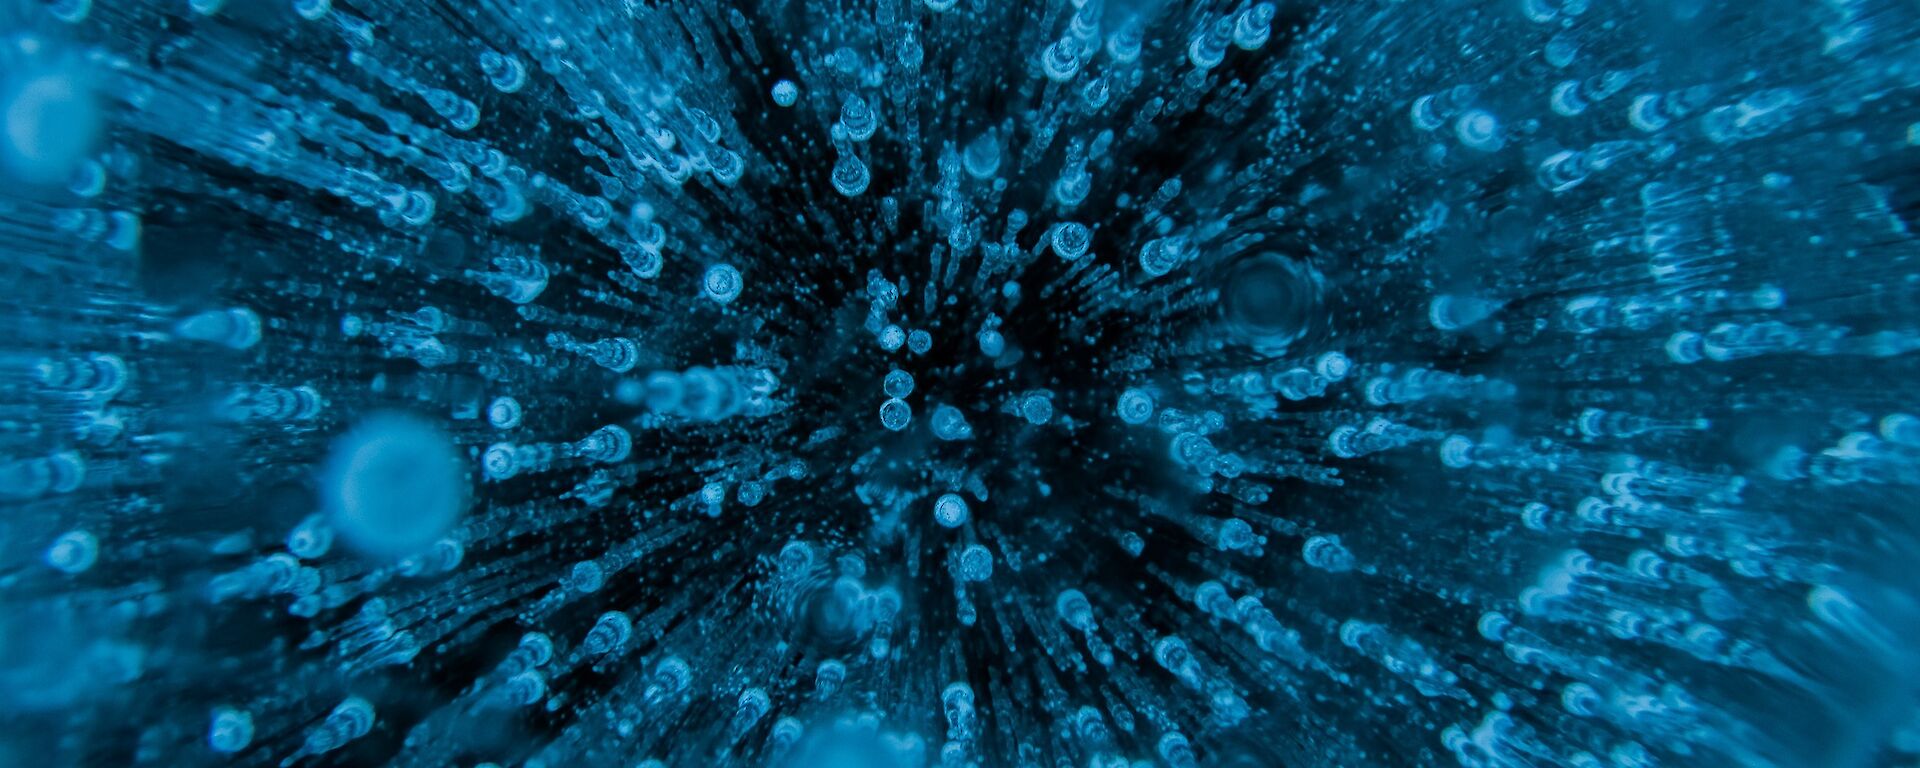 A close up of frozen water showing hundreds of air bubbles trapped in the ice